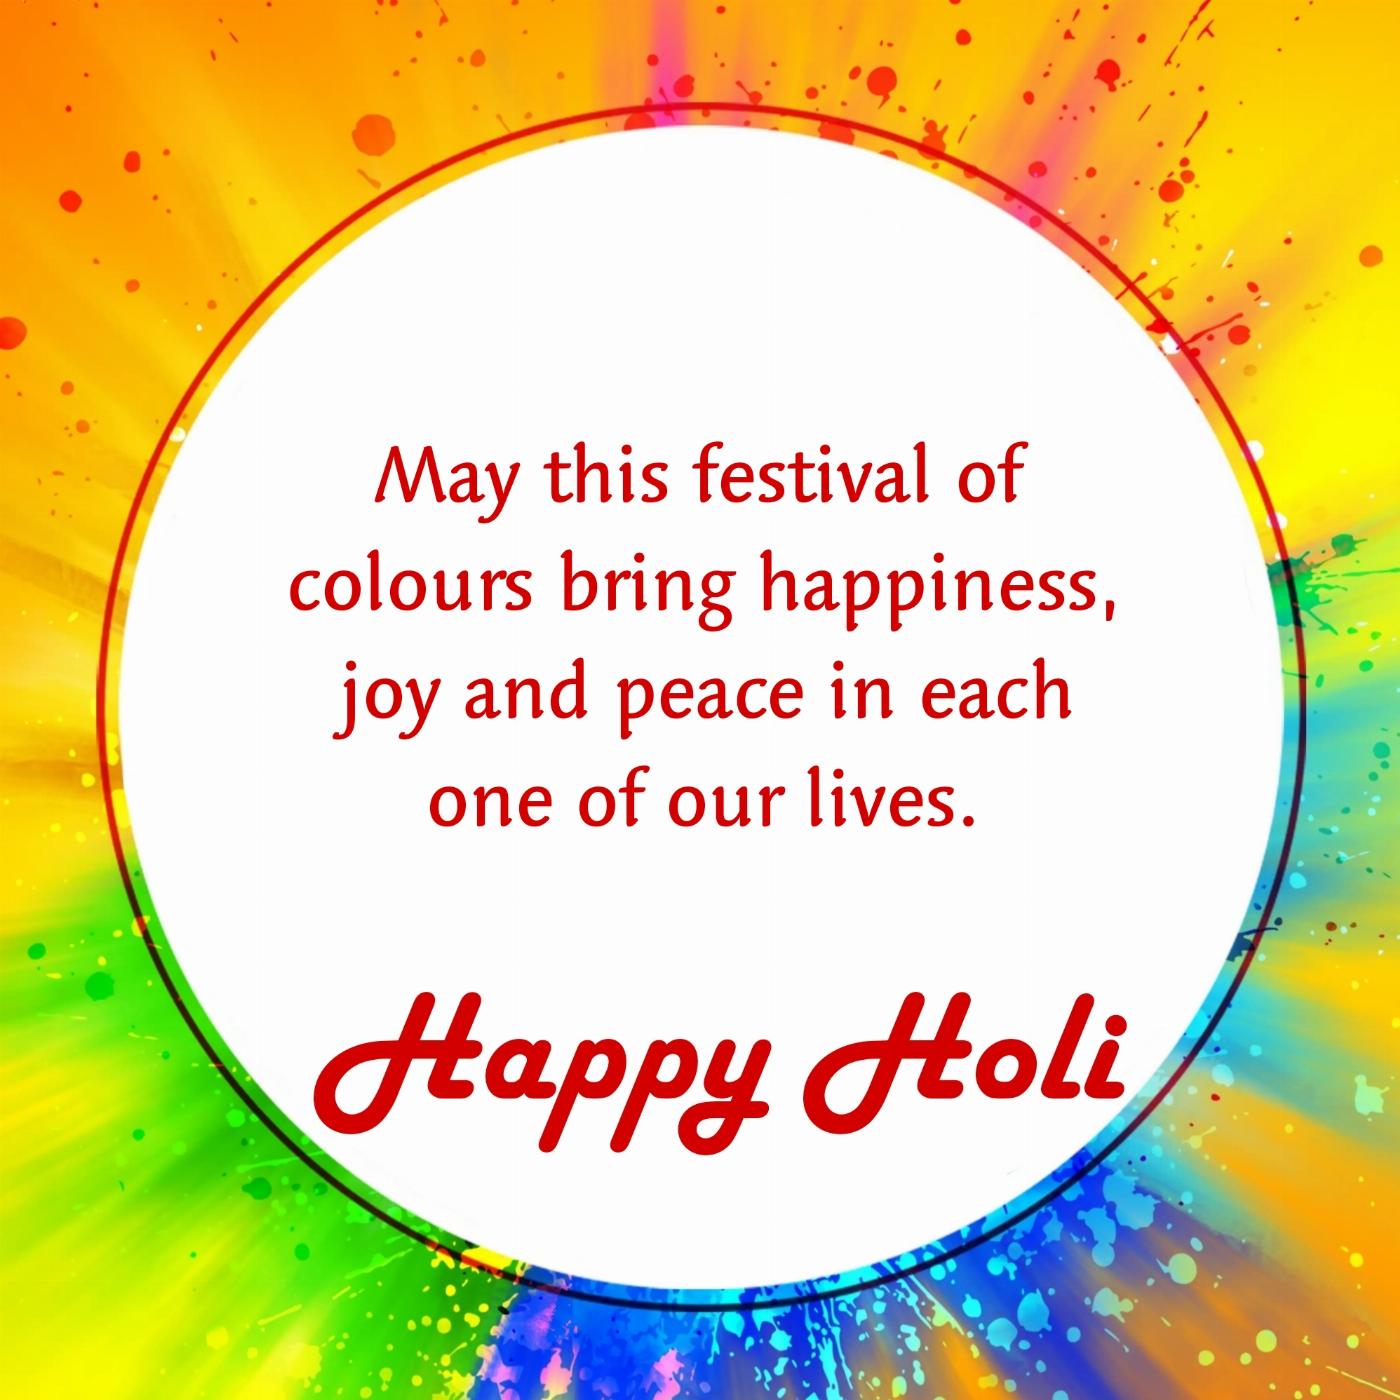 May the festival of colours bring love and happiness in your life